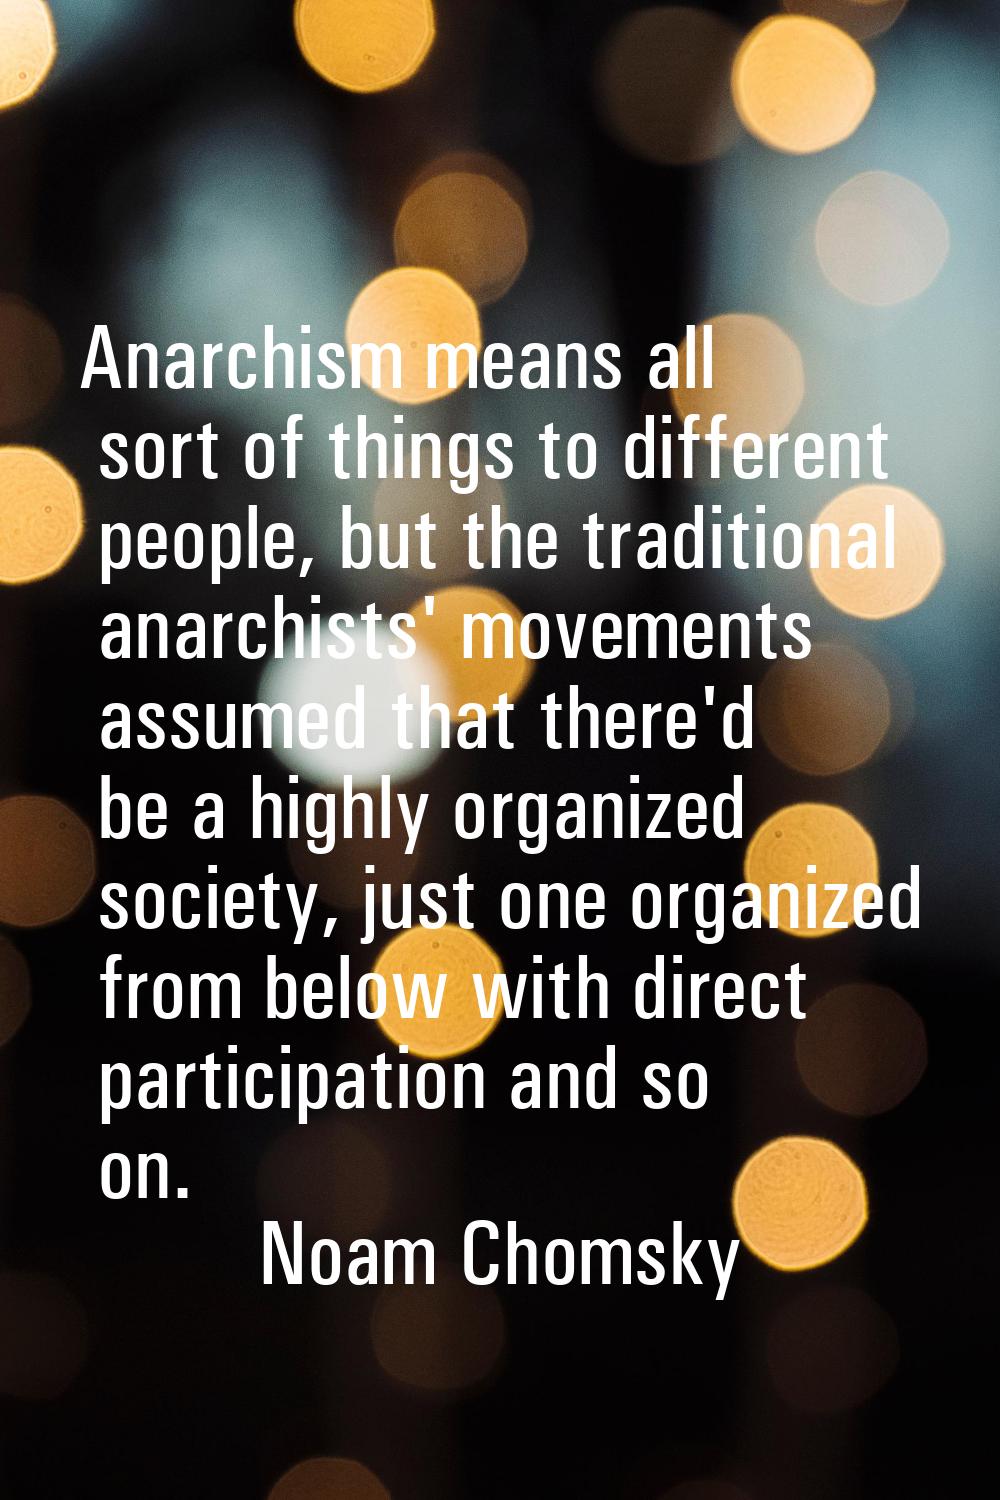 Anarchism means all sort of things to different people, but the traditional anarchists' movements a